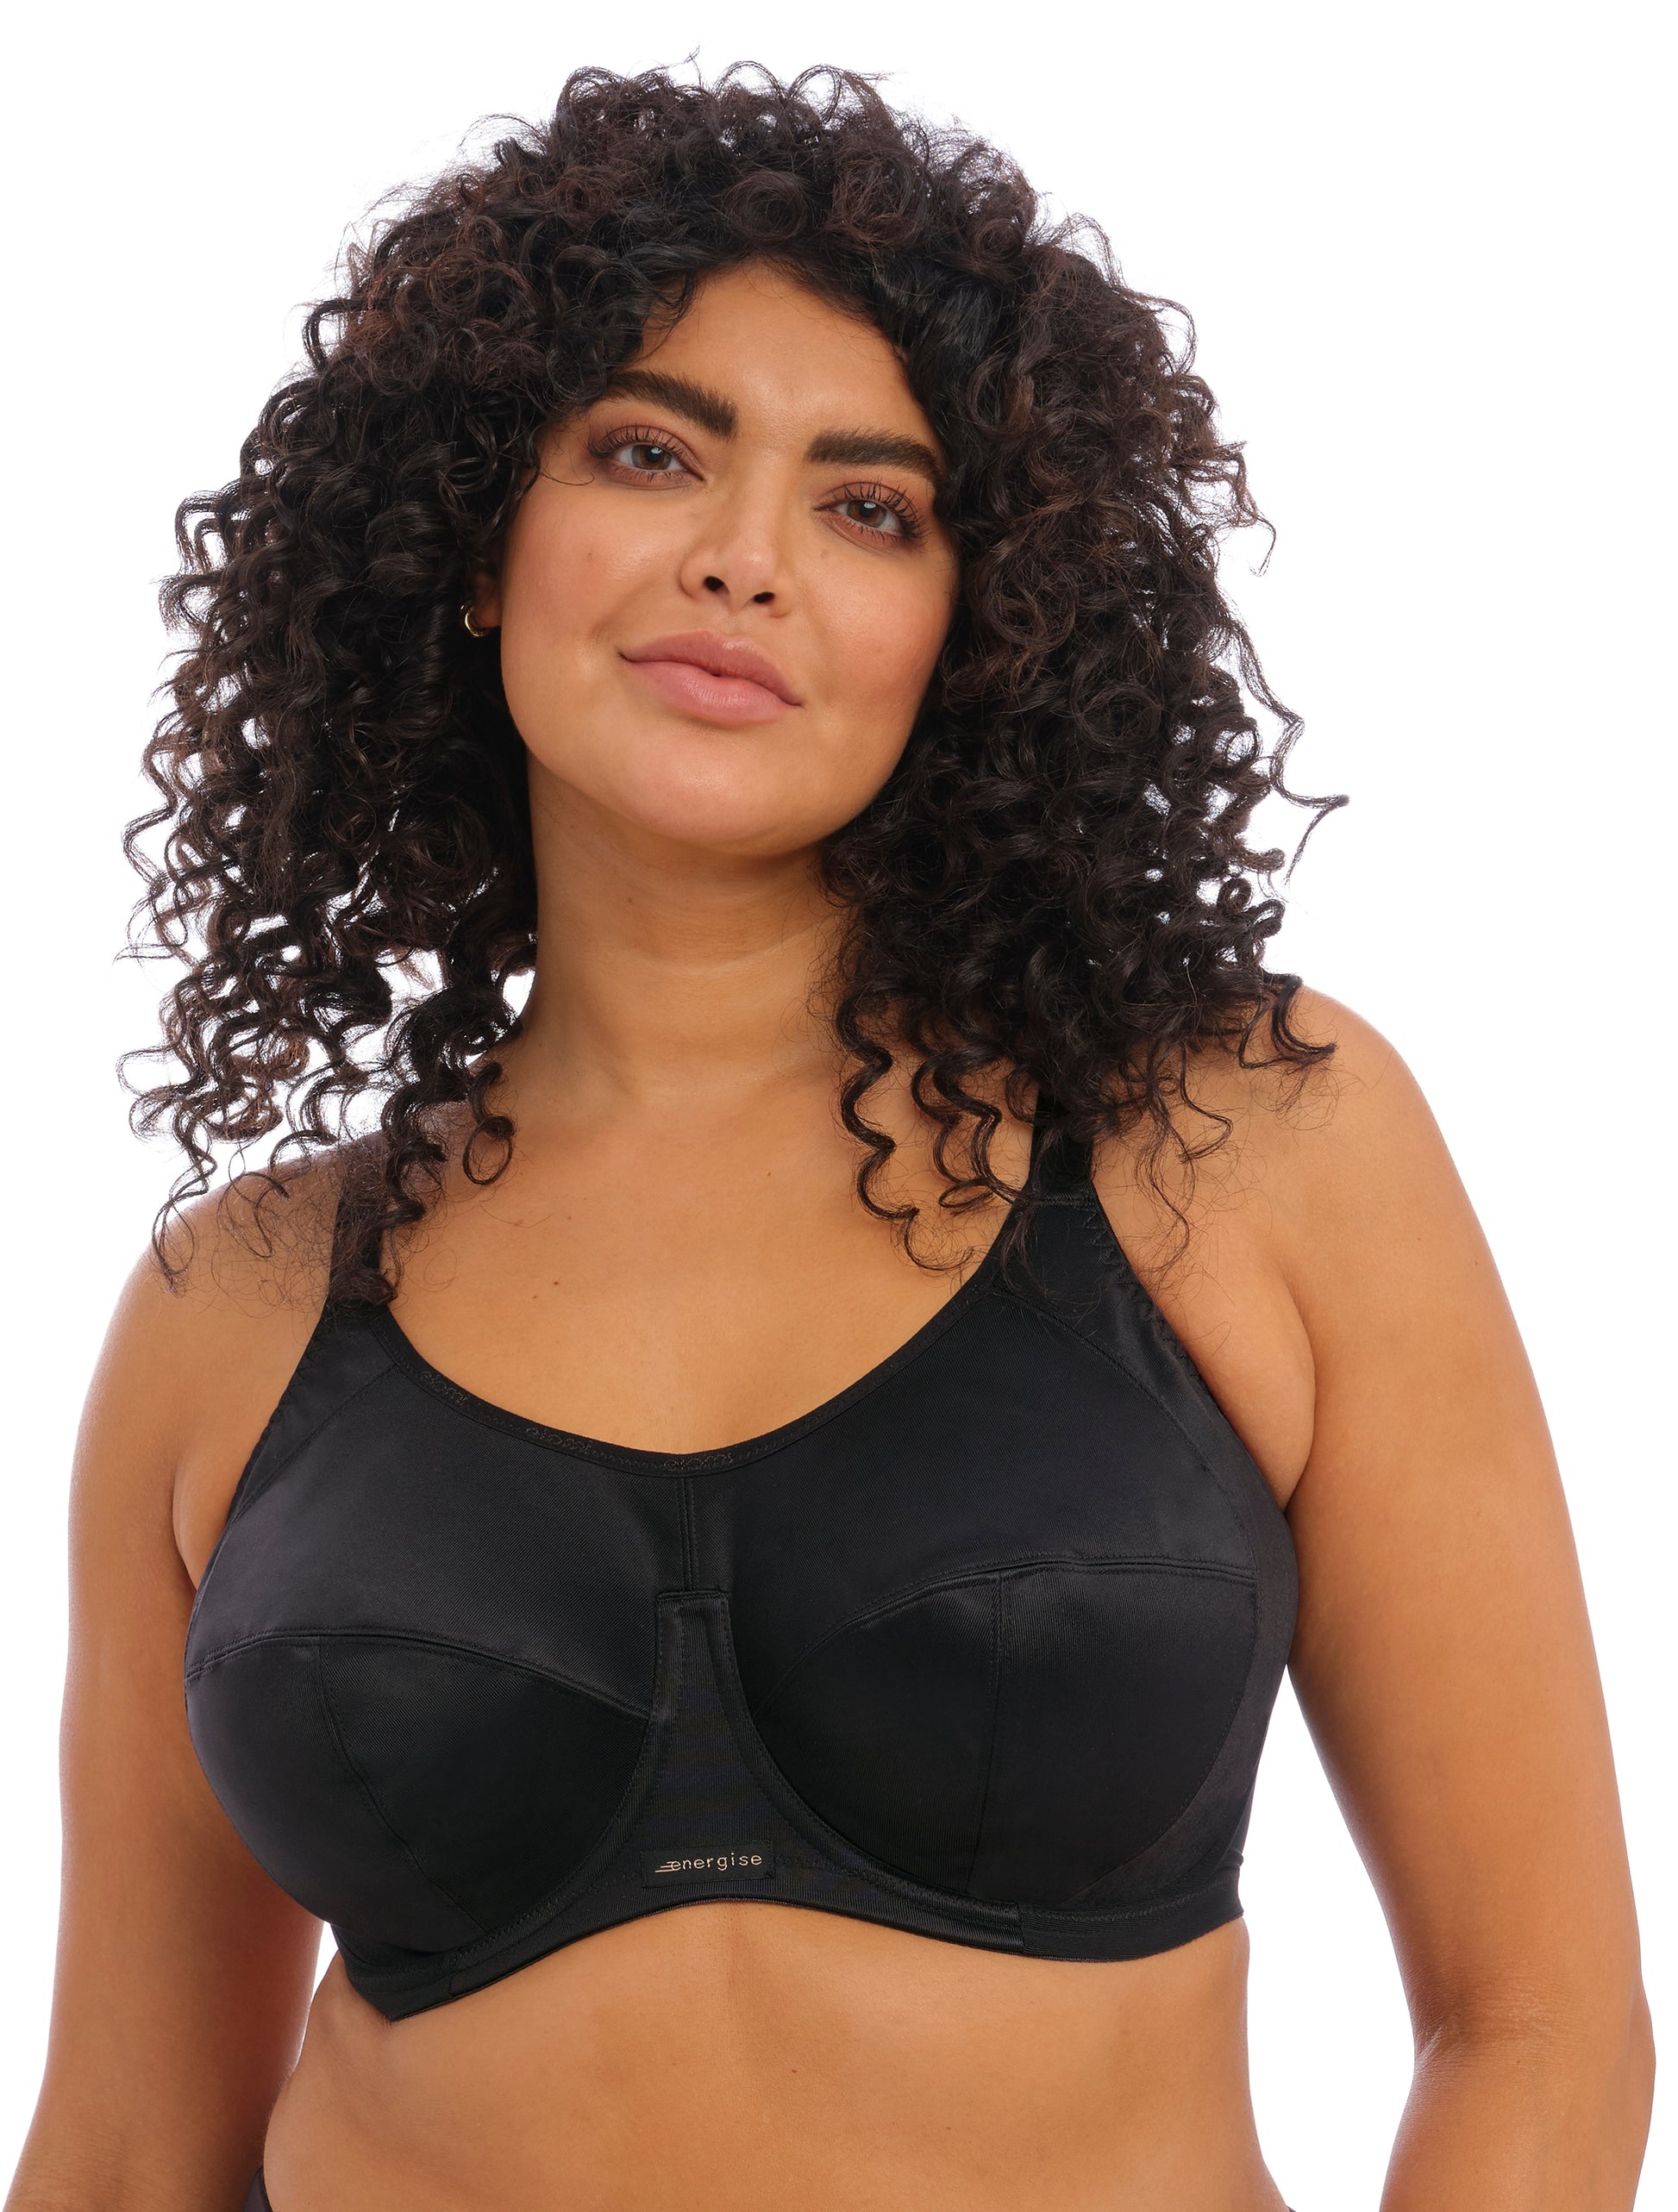 Side Support Bras 38E, Bras for Large Breasts